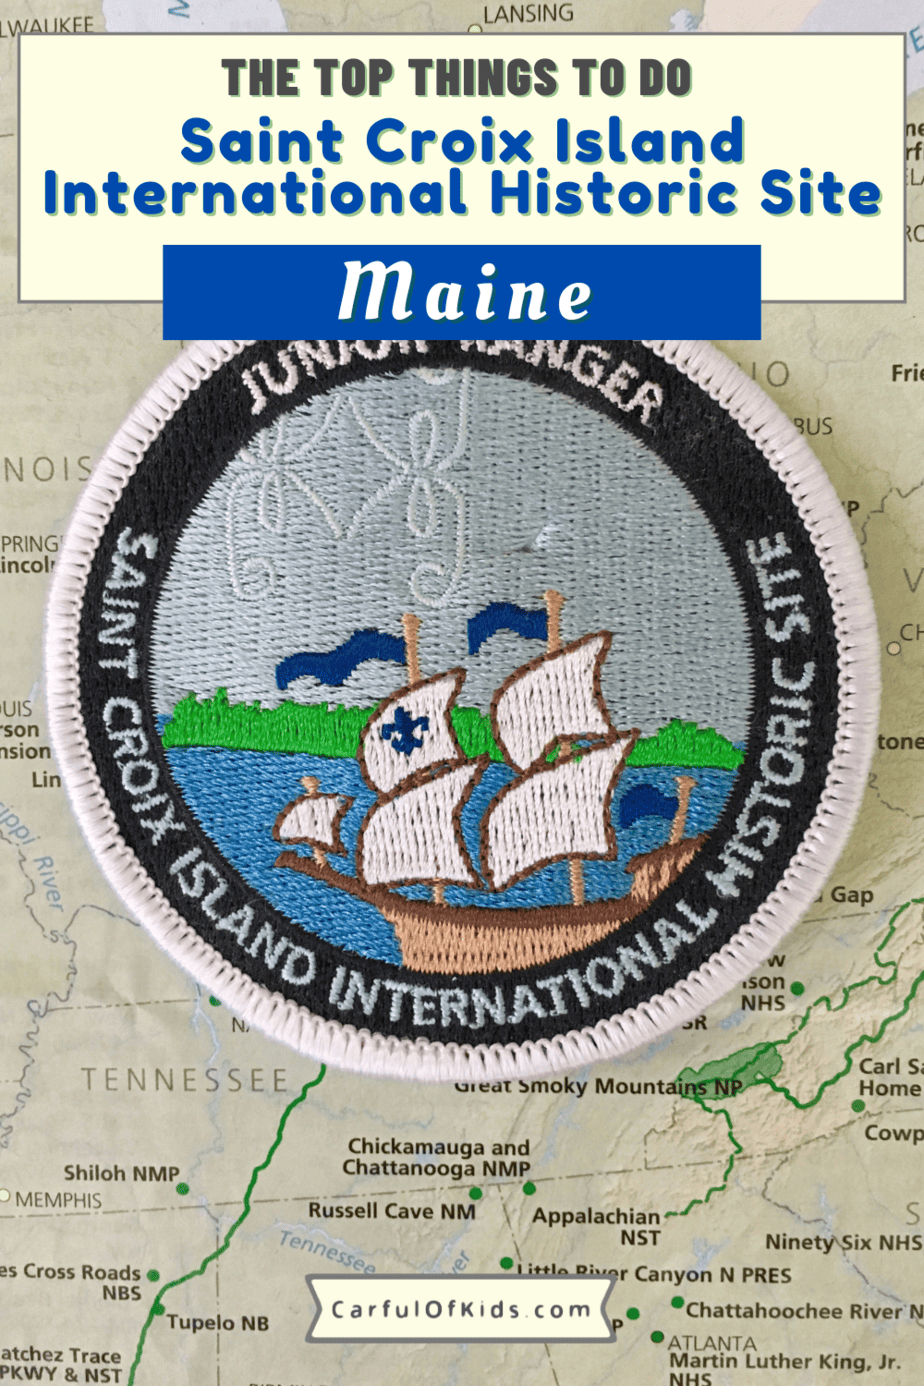 Kids love adventure. So learn about the North American Explorers at the First French Colony in North America at the Saint Croix Island International Historic Site while exploring Maine along the Canadian border. #NPS #NationalPark #Maine National Parks in Maine 